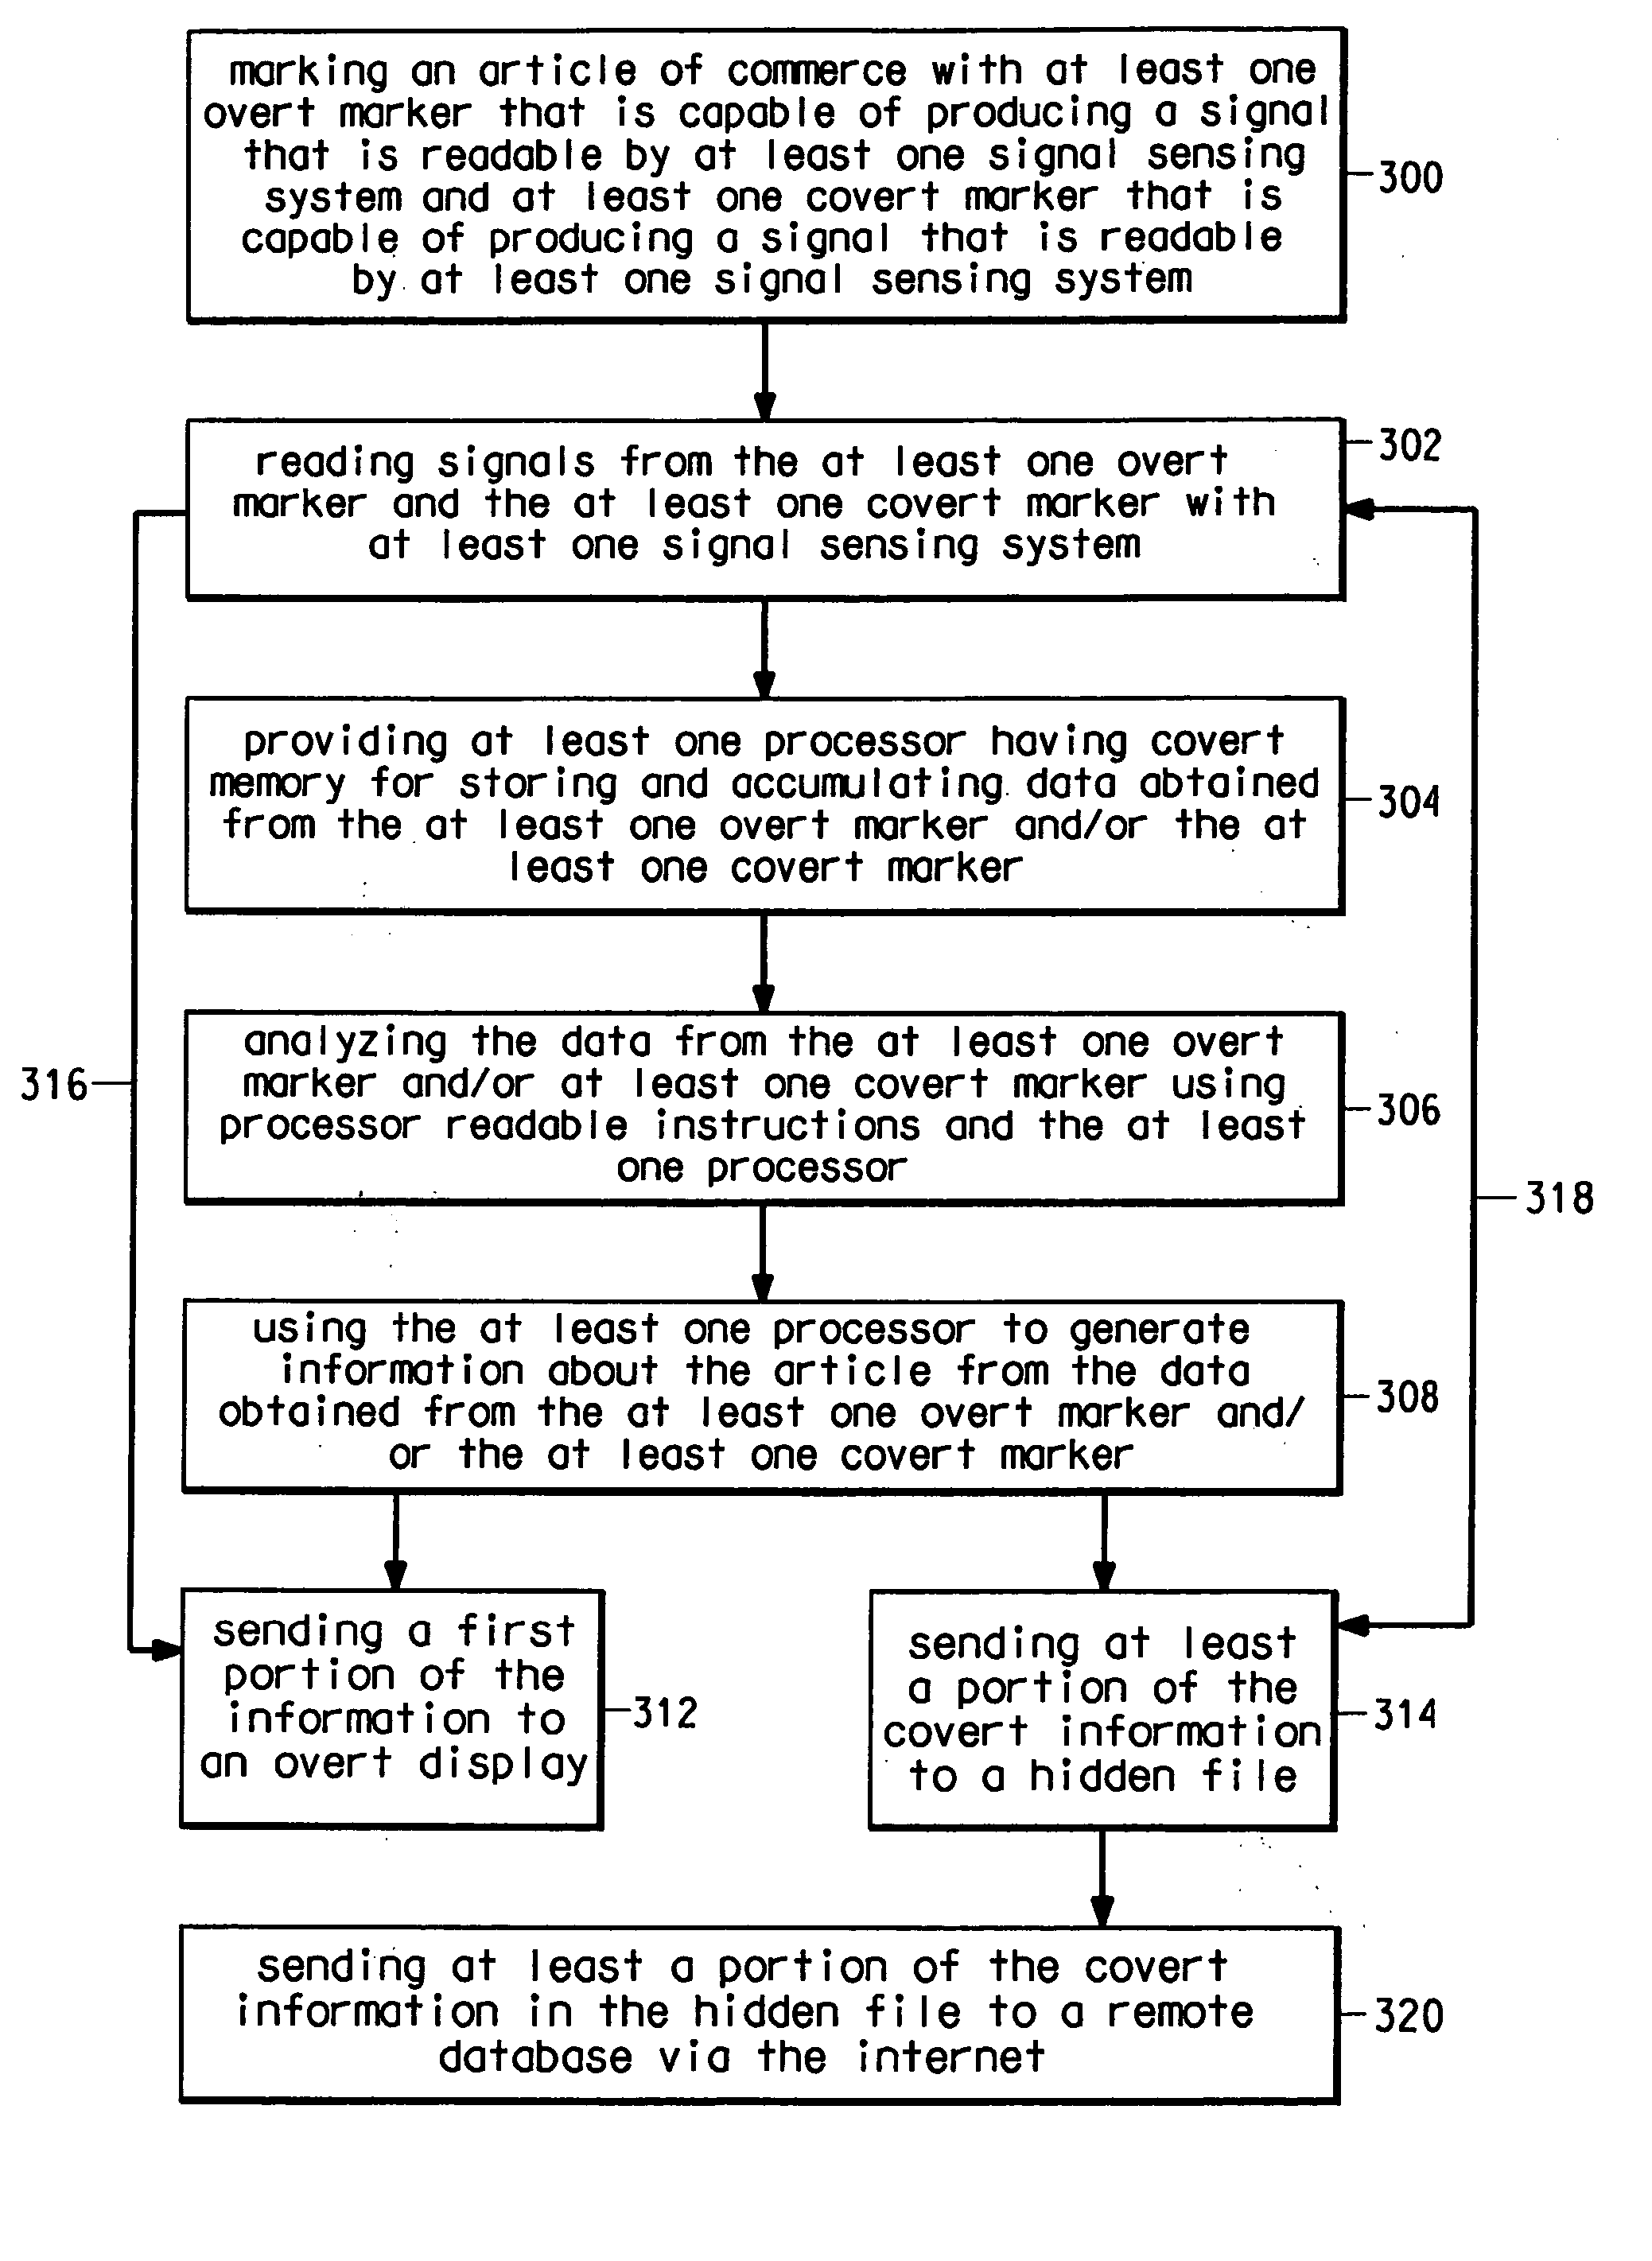 Method for tracking and tracing marked articles